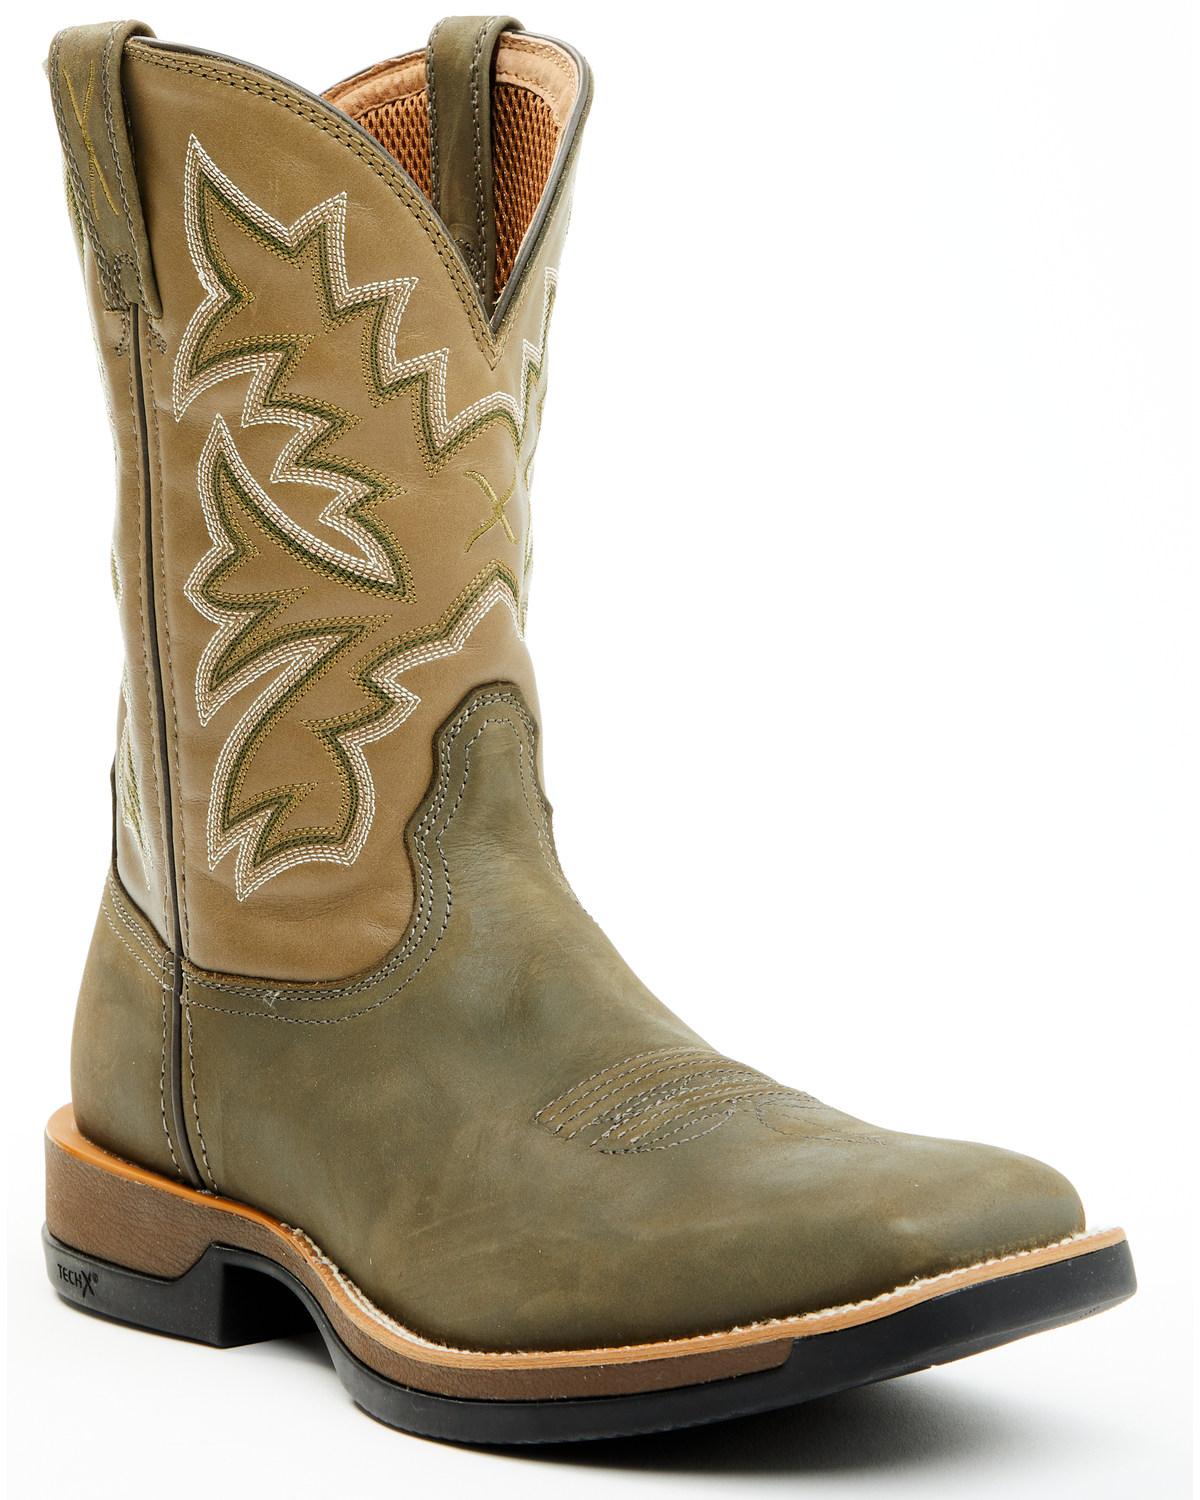 Twisted X Men's 11" Tech X™ Performance Western Boots - Broad Square Toe